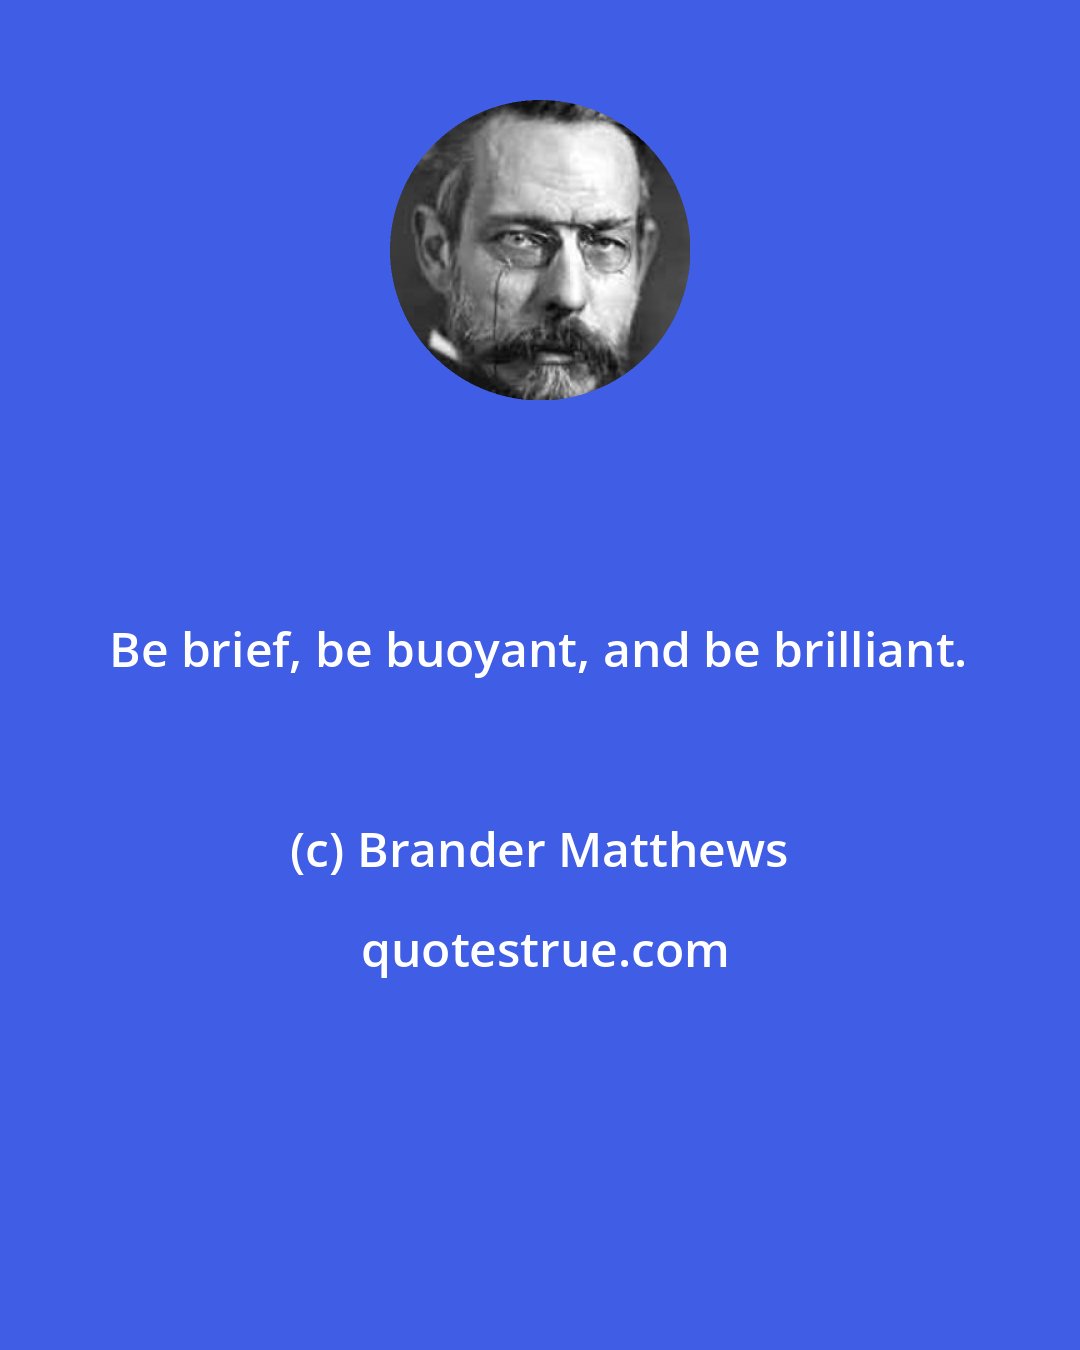 Brander Matthews: Be brief, be buoyant, and be brilliant.